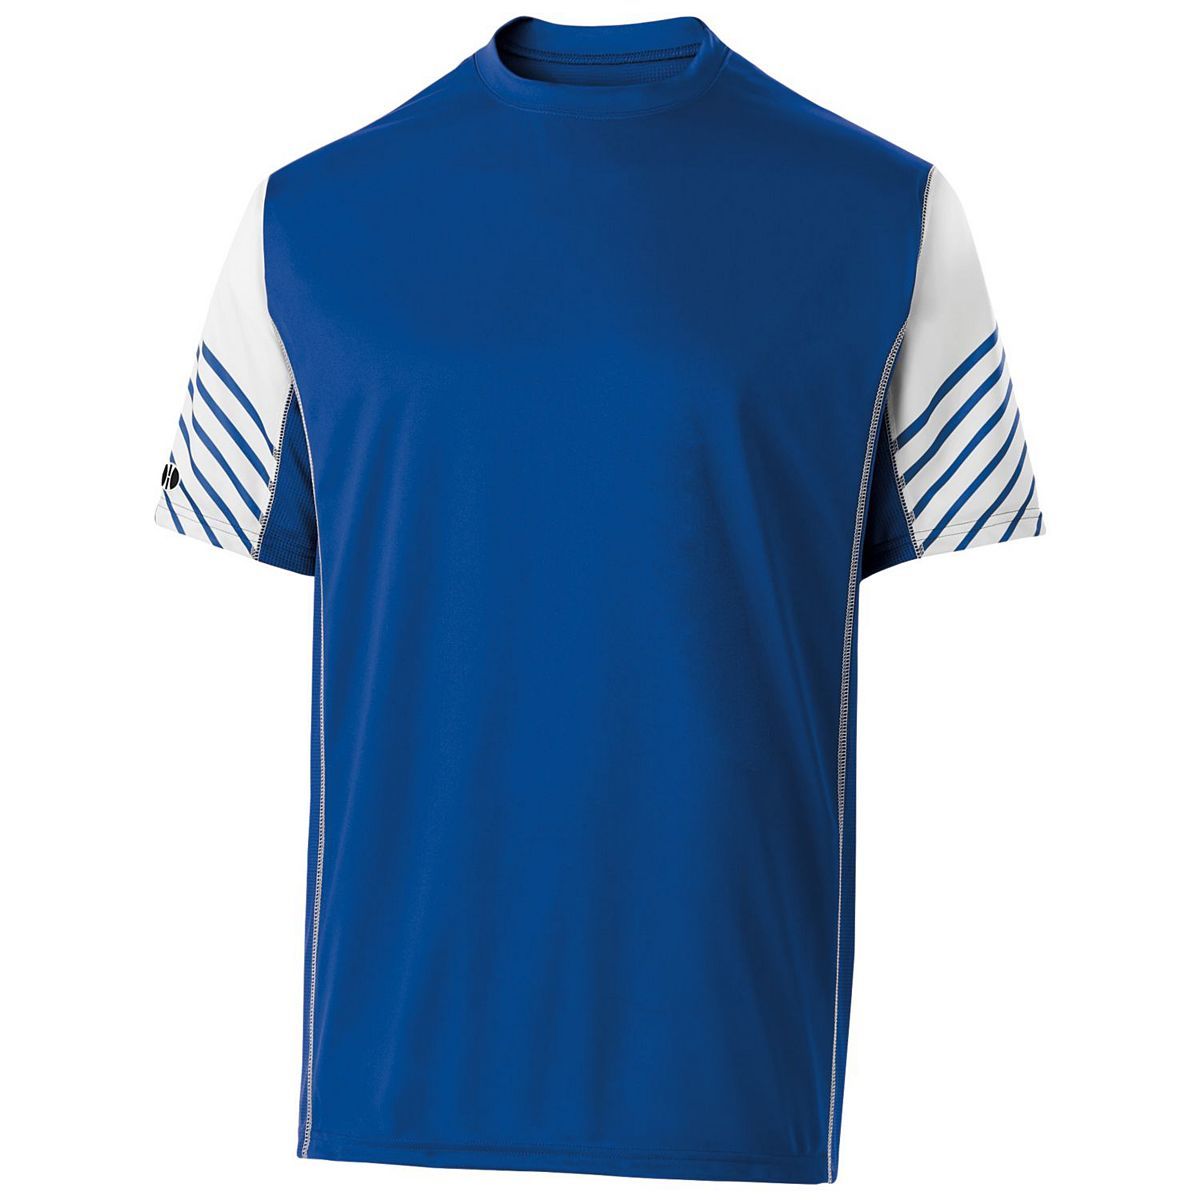 Holloway Youth Arc Short Sleeve Shirt in Royal/White  -Part of the Youth, Holloway, Shirts product lines at KanaleyCreations.com